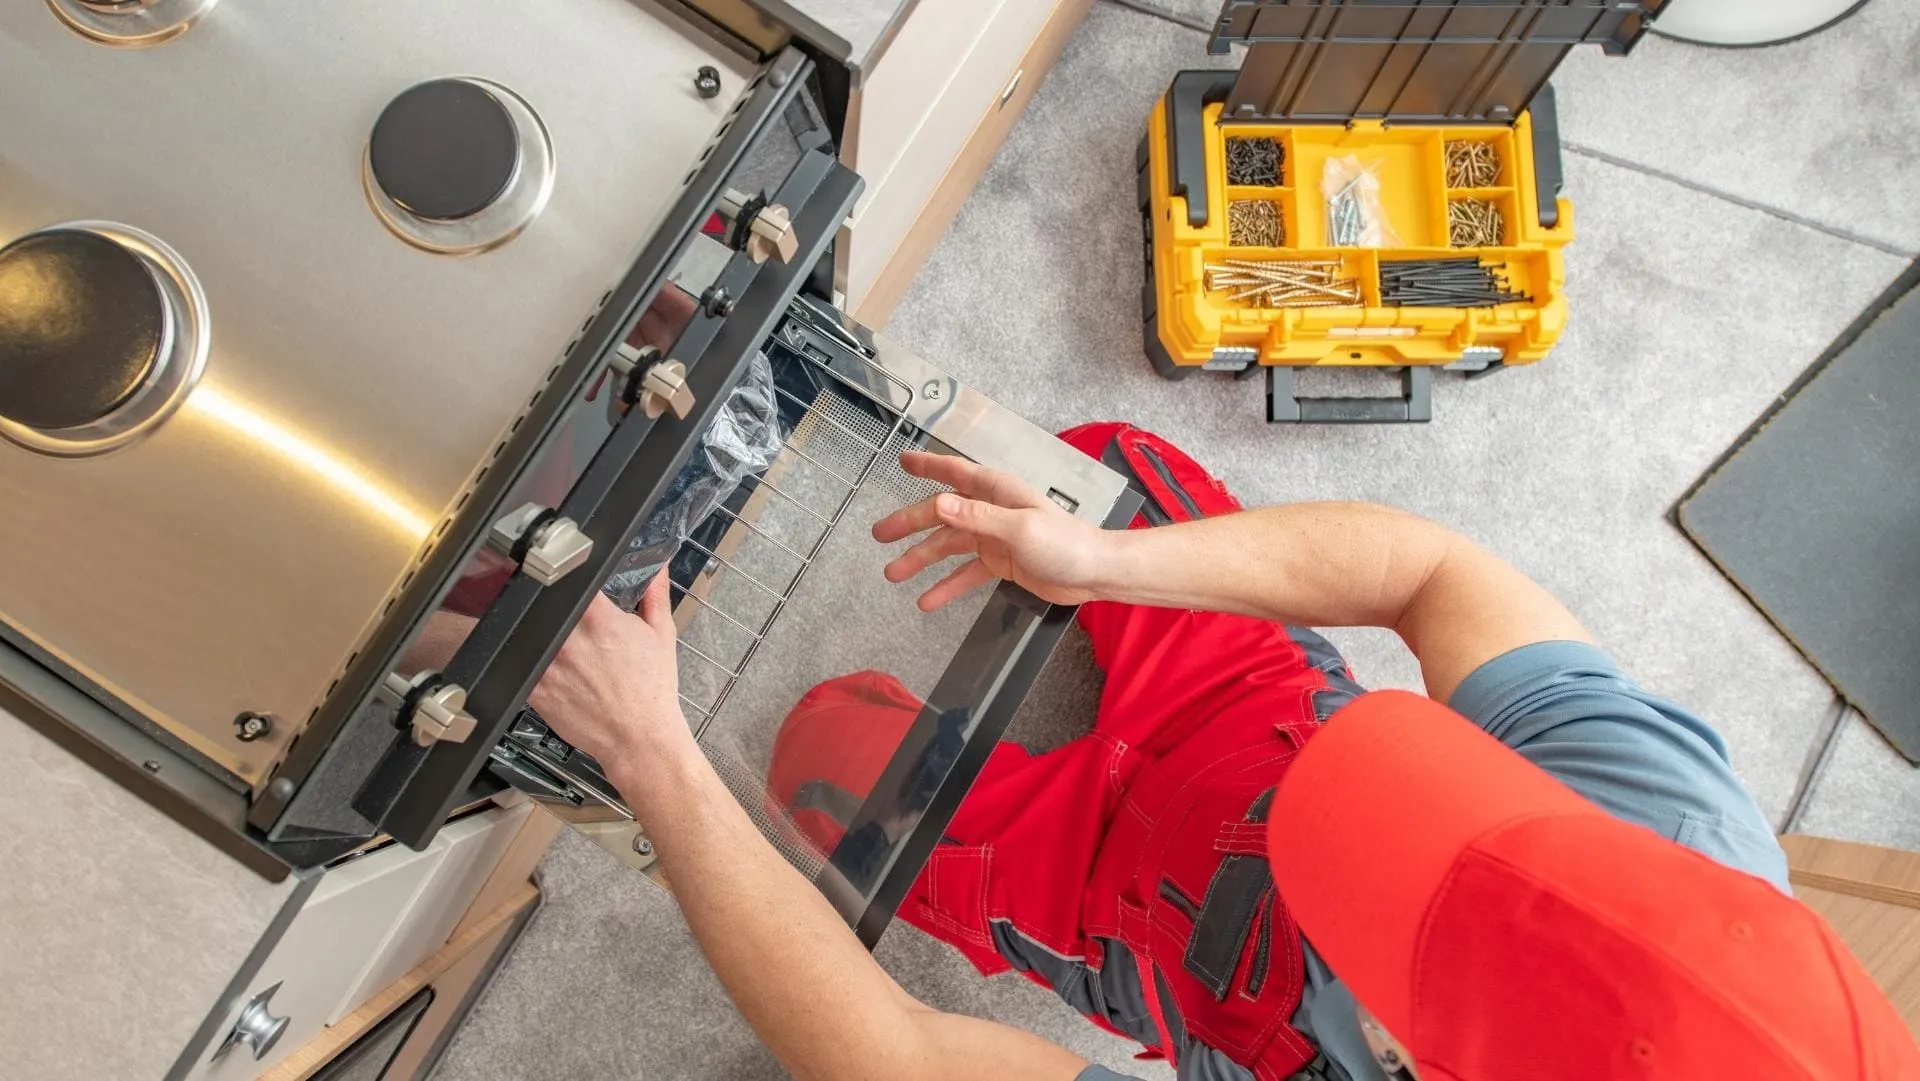 A mobile RV repair technician can be a great option for you